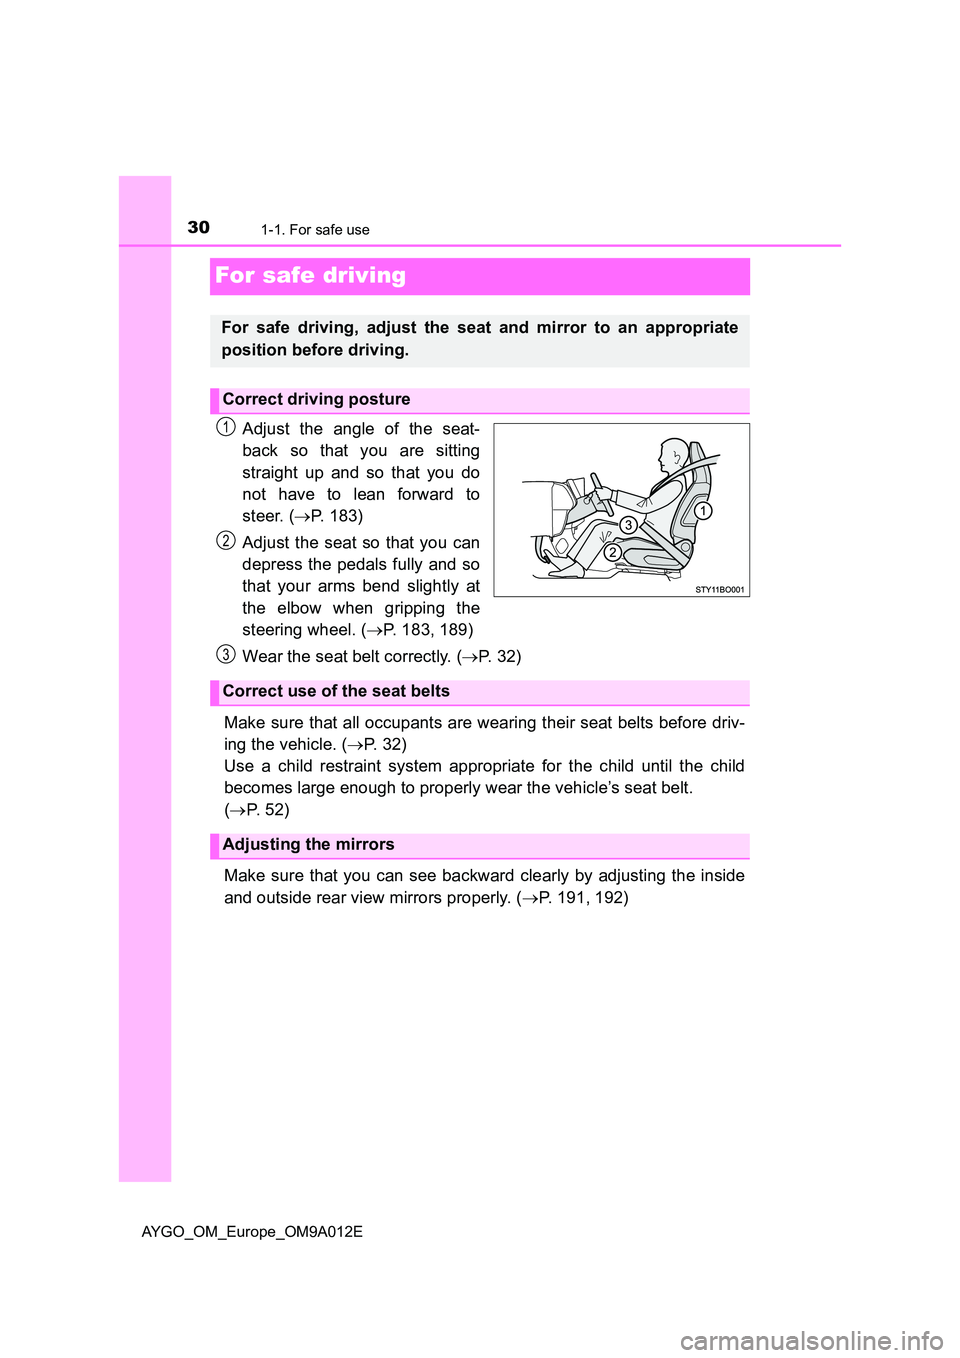 TOYOTA AYGO 2021  Owners Manual 301-1. For safe use
AYGO_OM_Europe_OM9A012E
For safe driving
Adjust the angle of the seat- 
back so that you are sitting 
straight up and so that you do 
not have to lean forward to 
steer. ( P. 18